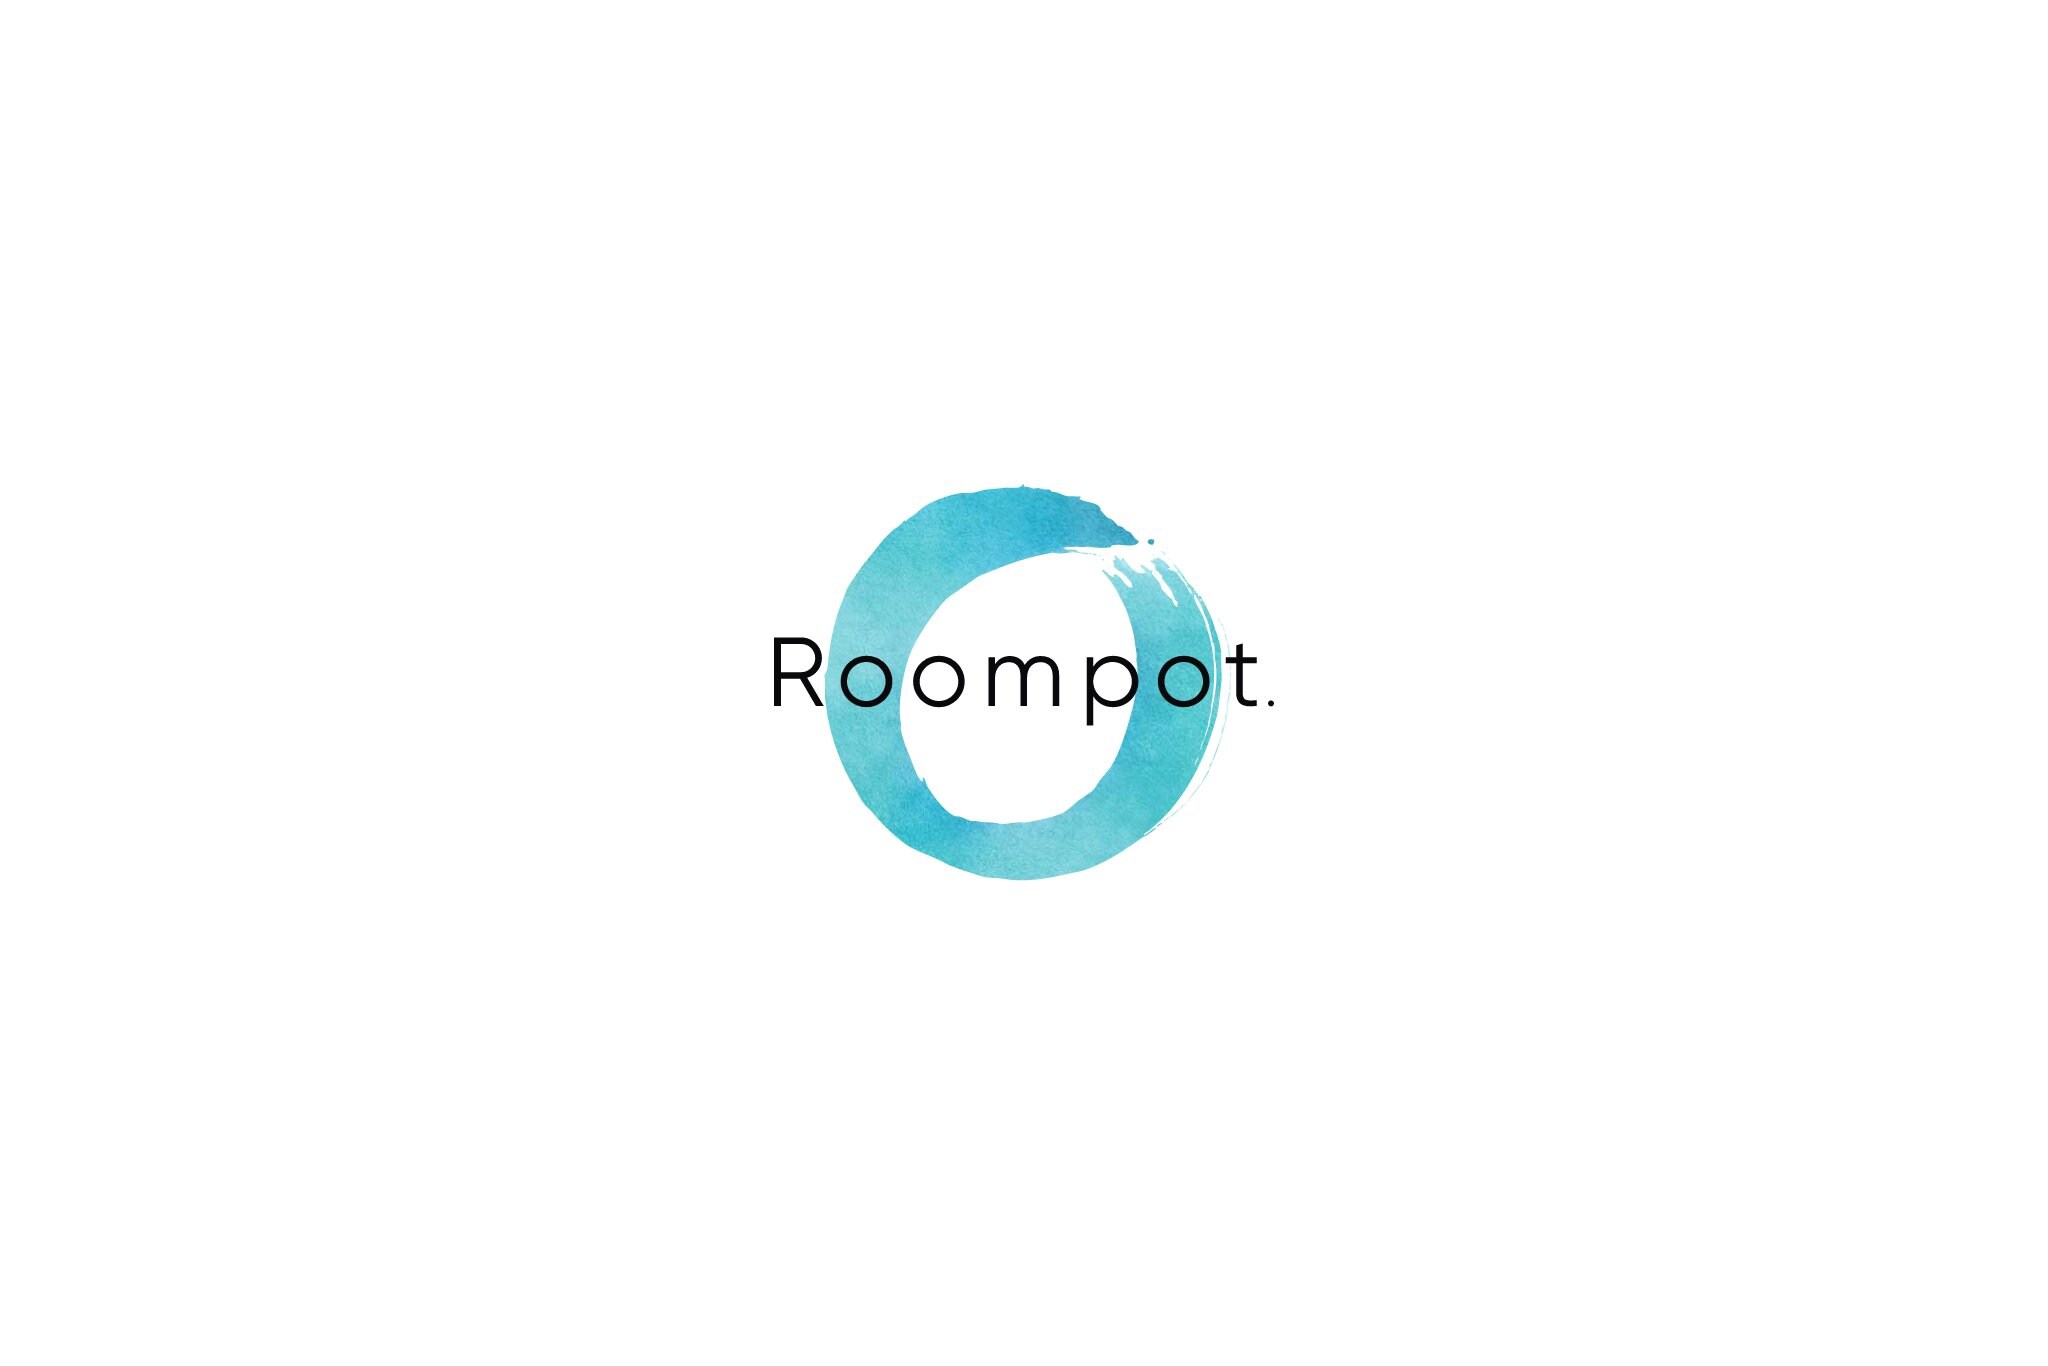 Dance Video - Roompot Club Song